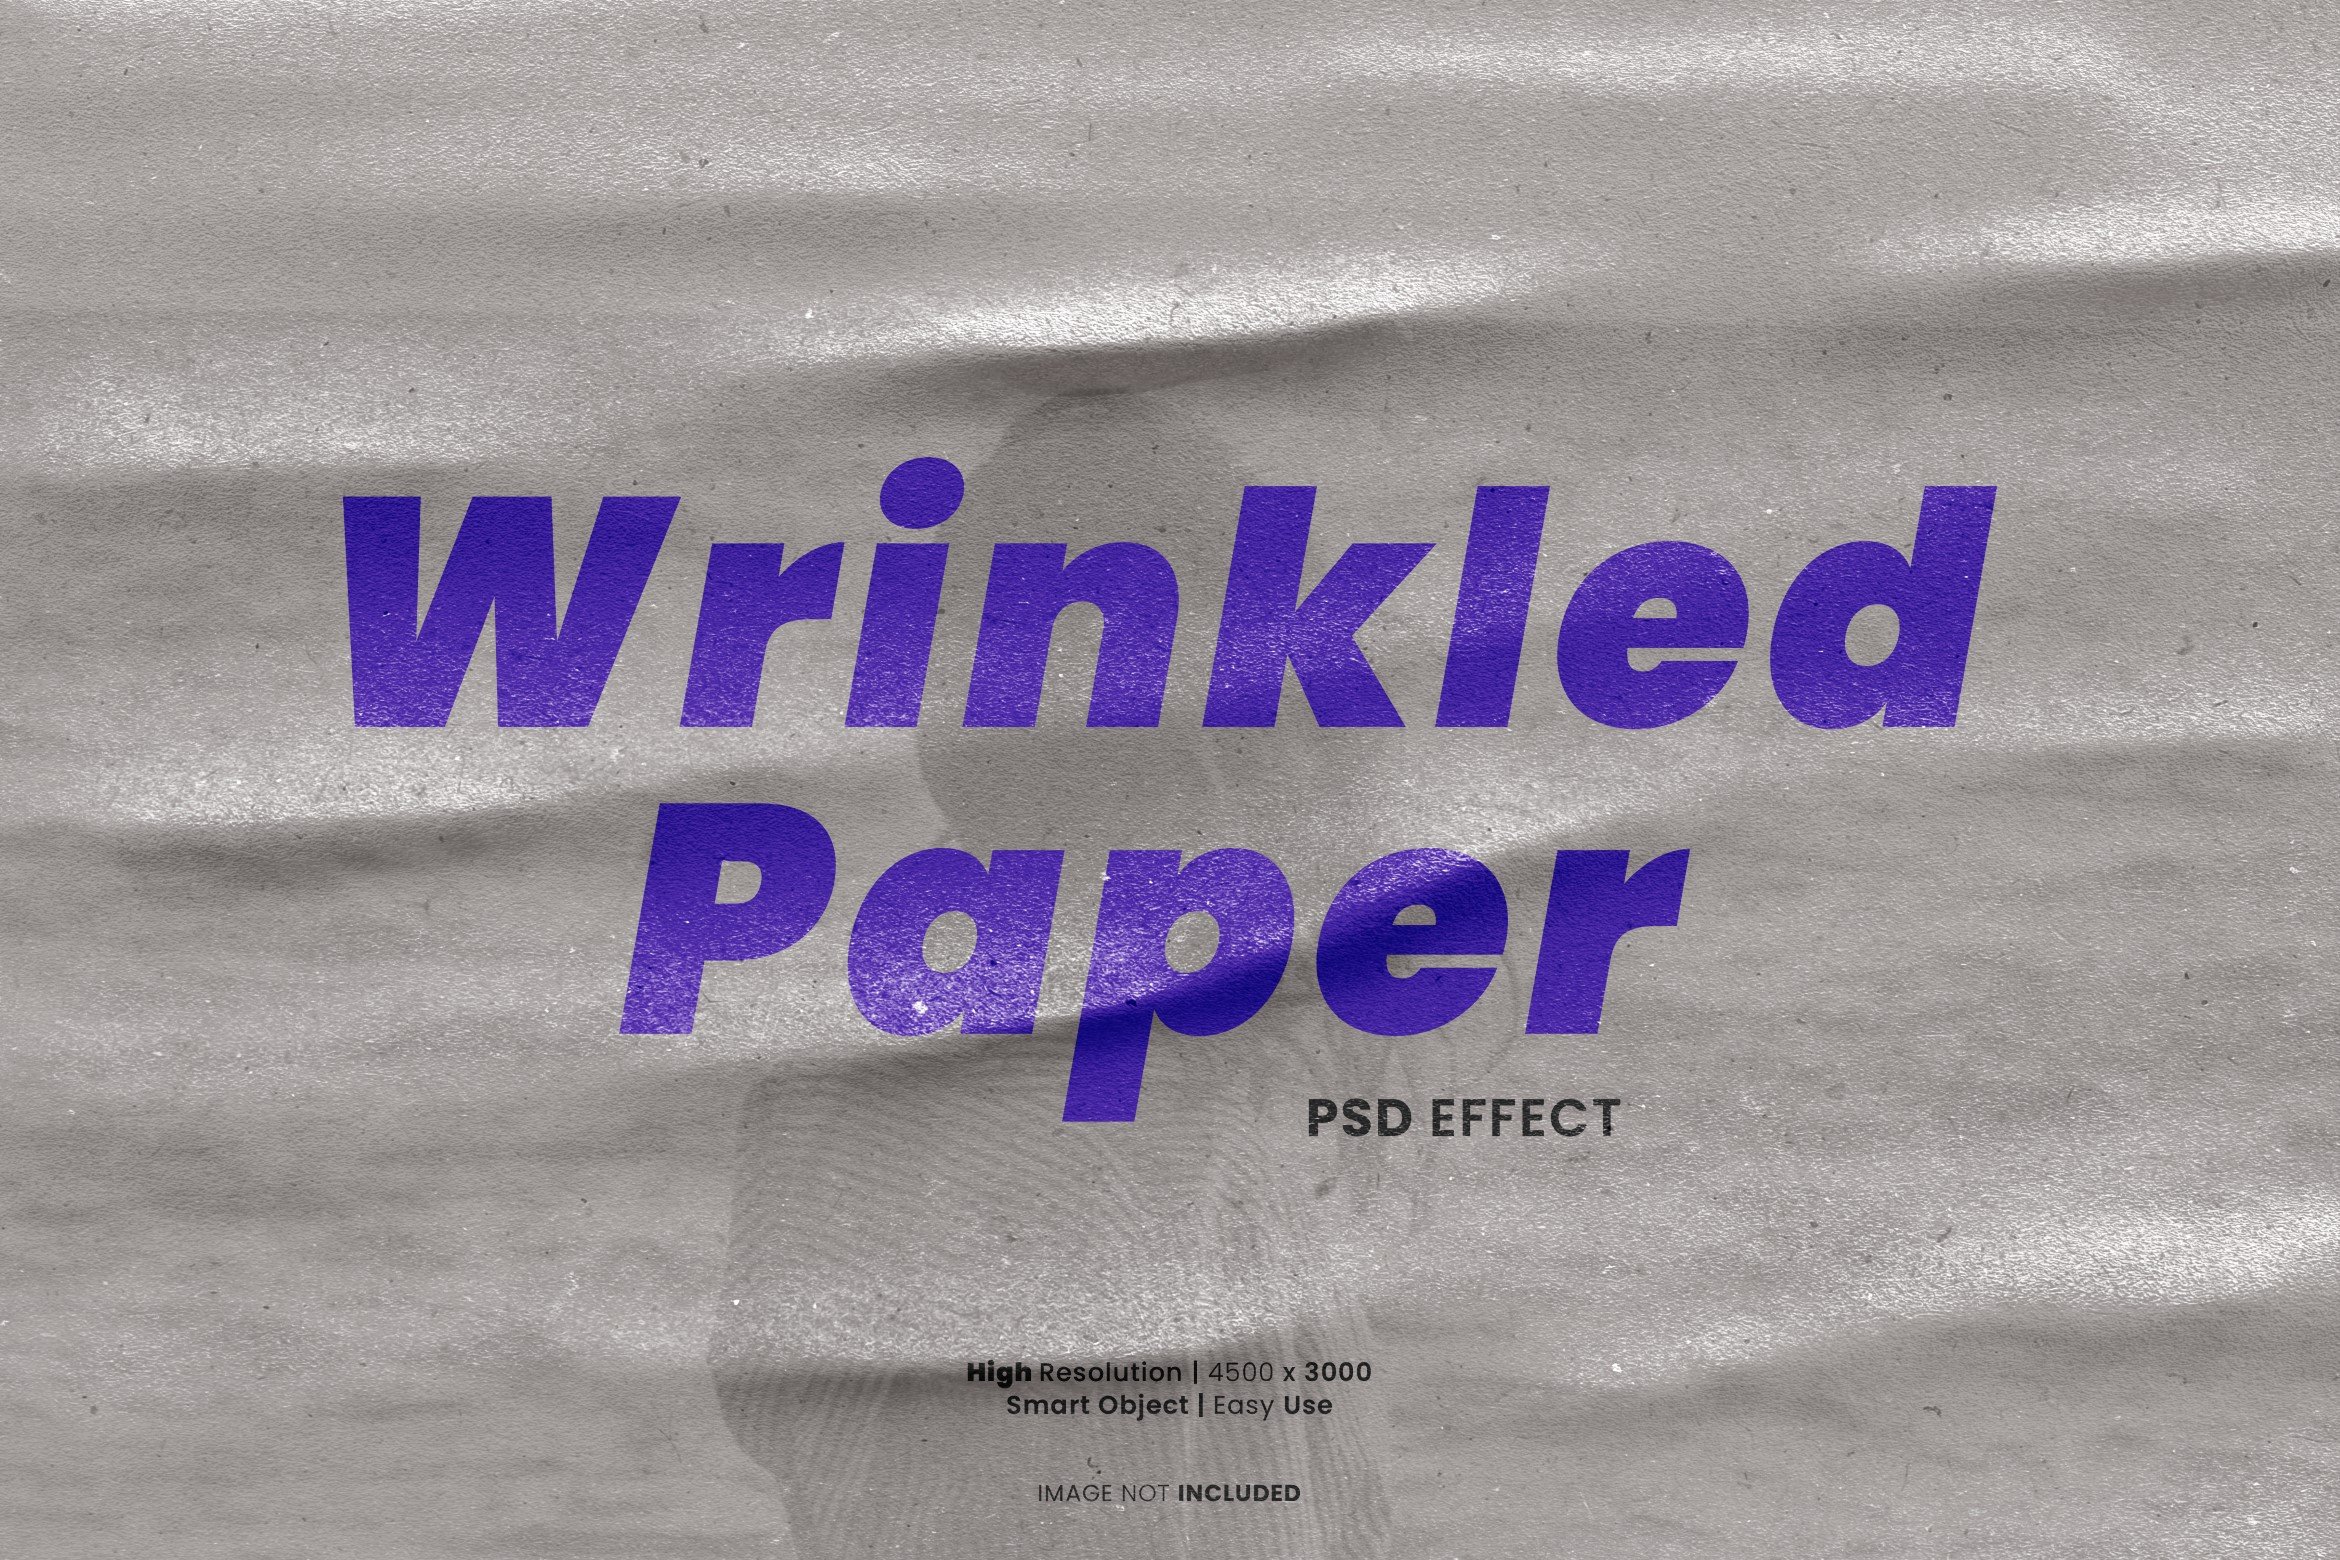 Wrinkled Paper Photo Effect Psdcover image.